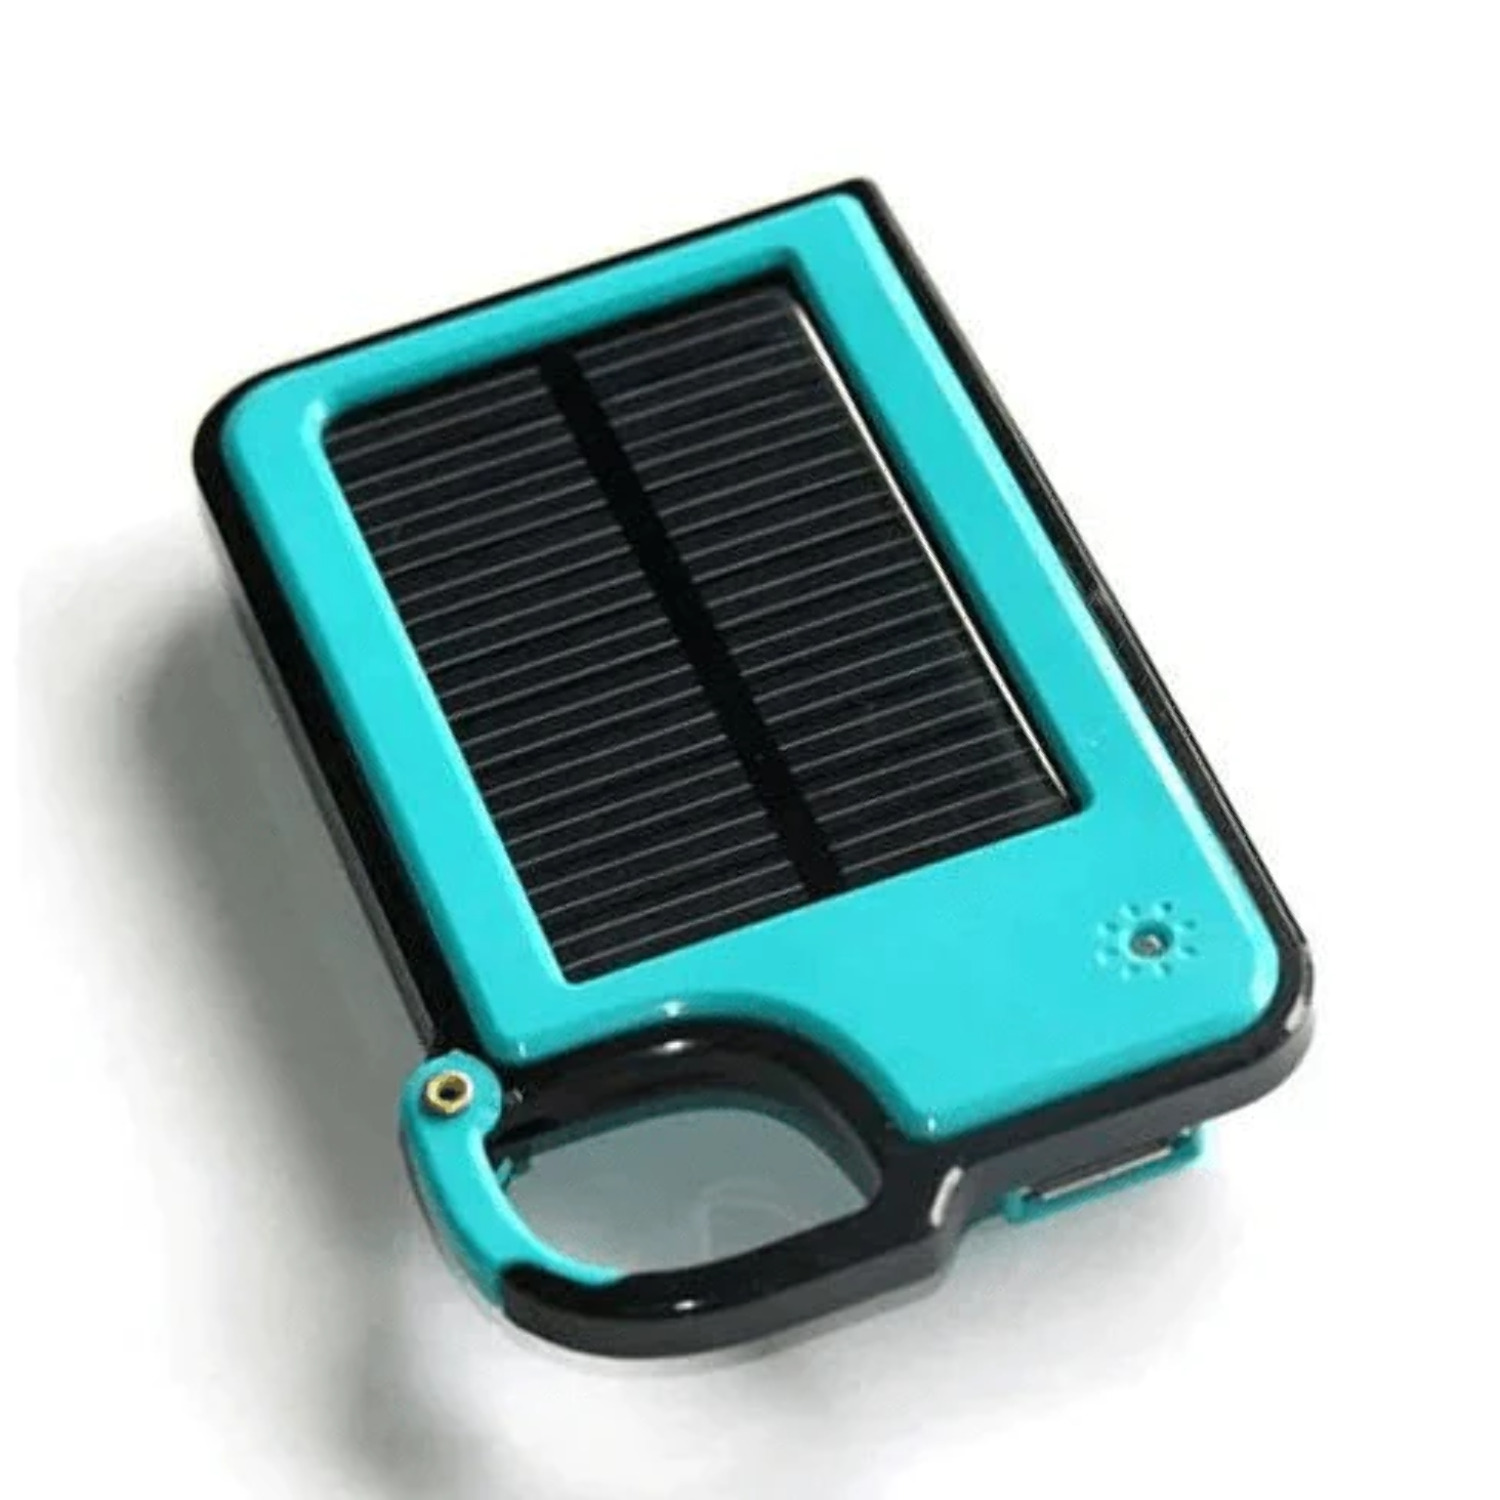 Clip-on Tag Along Solar Charger and 4050 mAh PowerBank For Your Smartphone - image 3 of 6